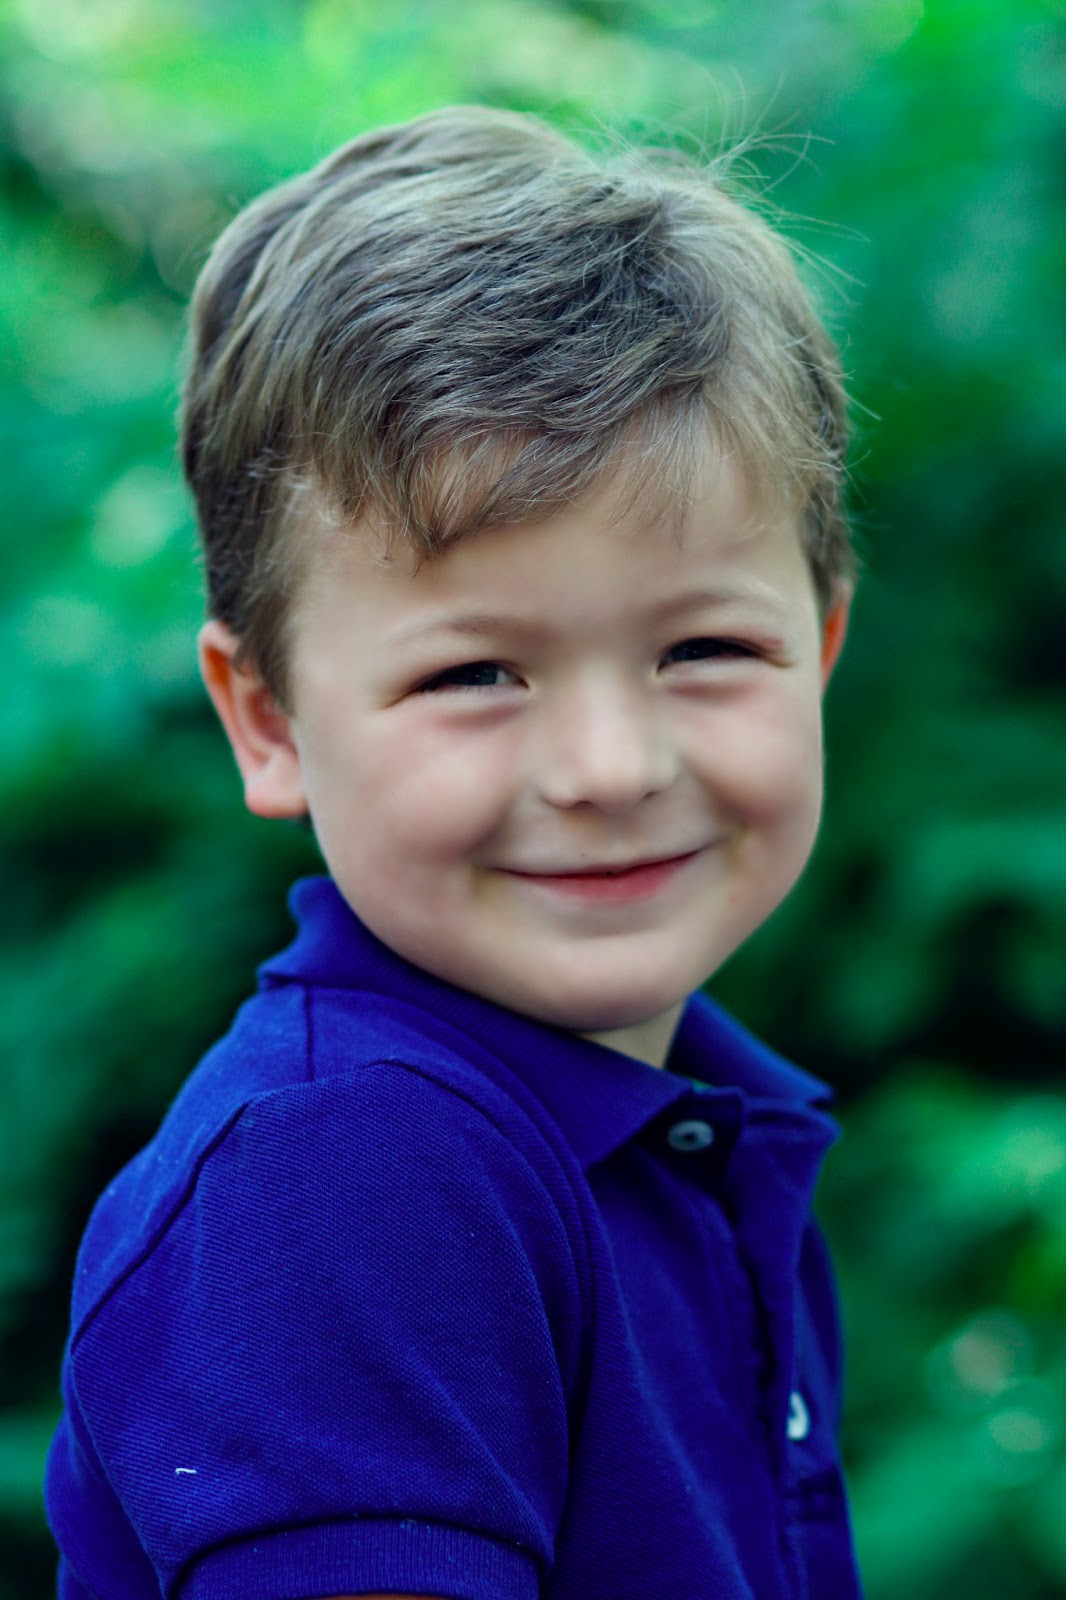 Press Pause/Deana Graham Photography: Blue eyes, sweet smiles and ...